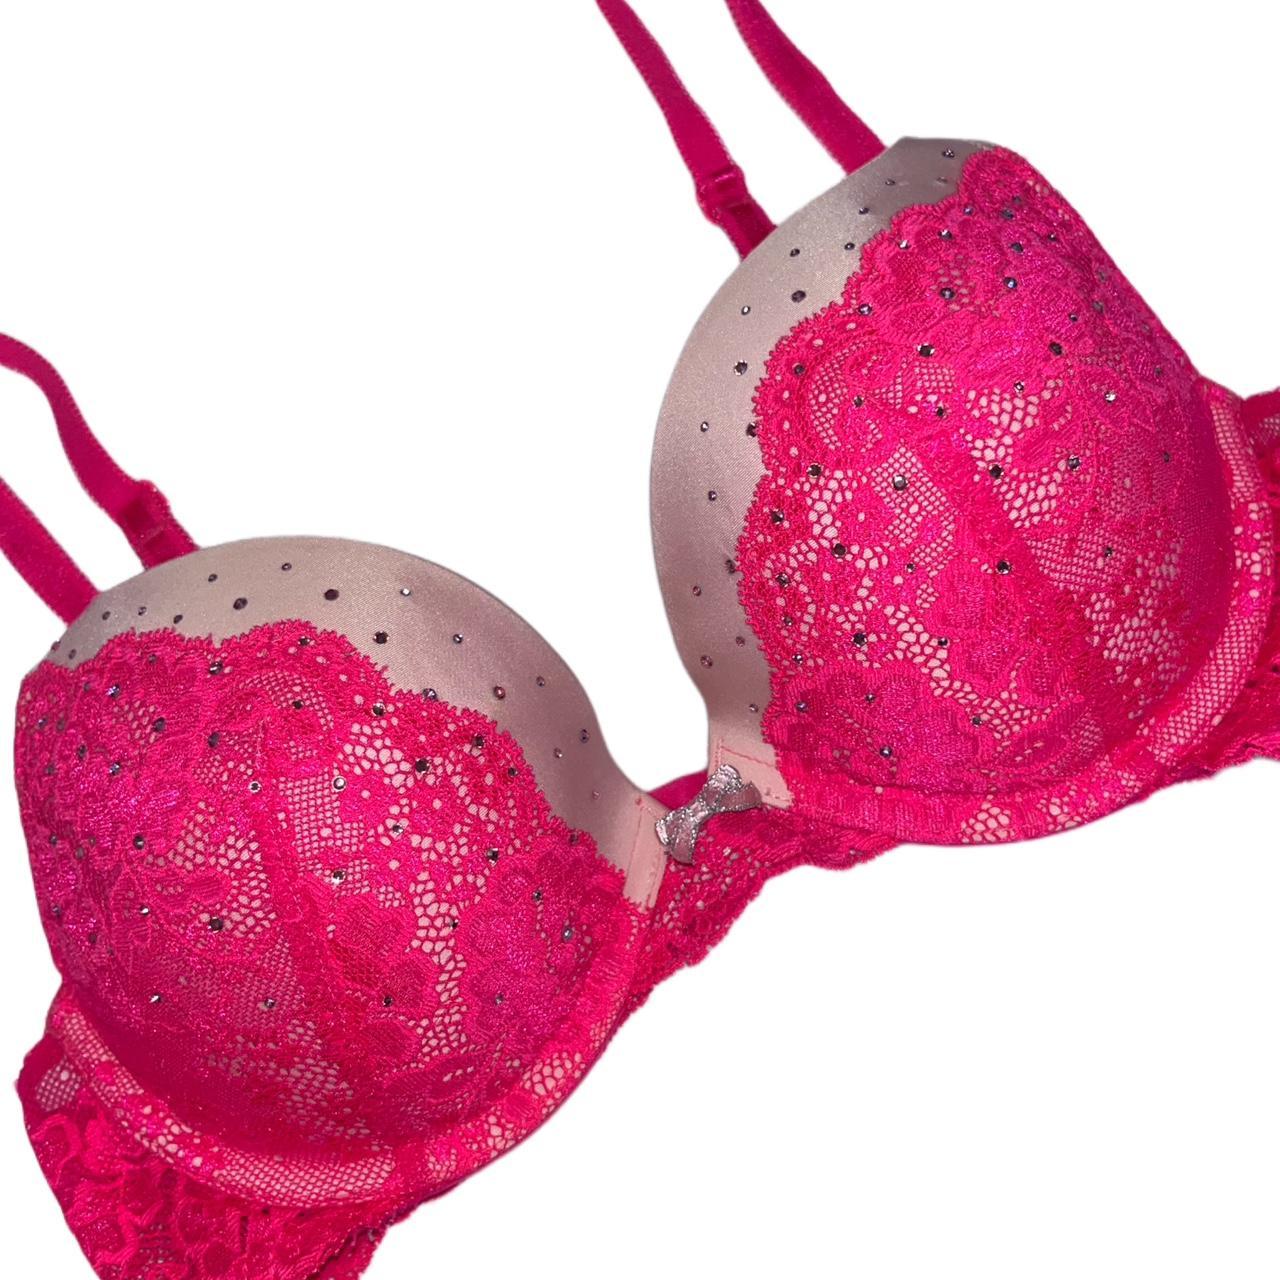 Pink Victoria secret push up bra , Studded with pink